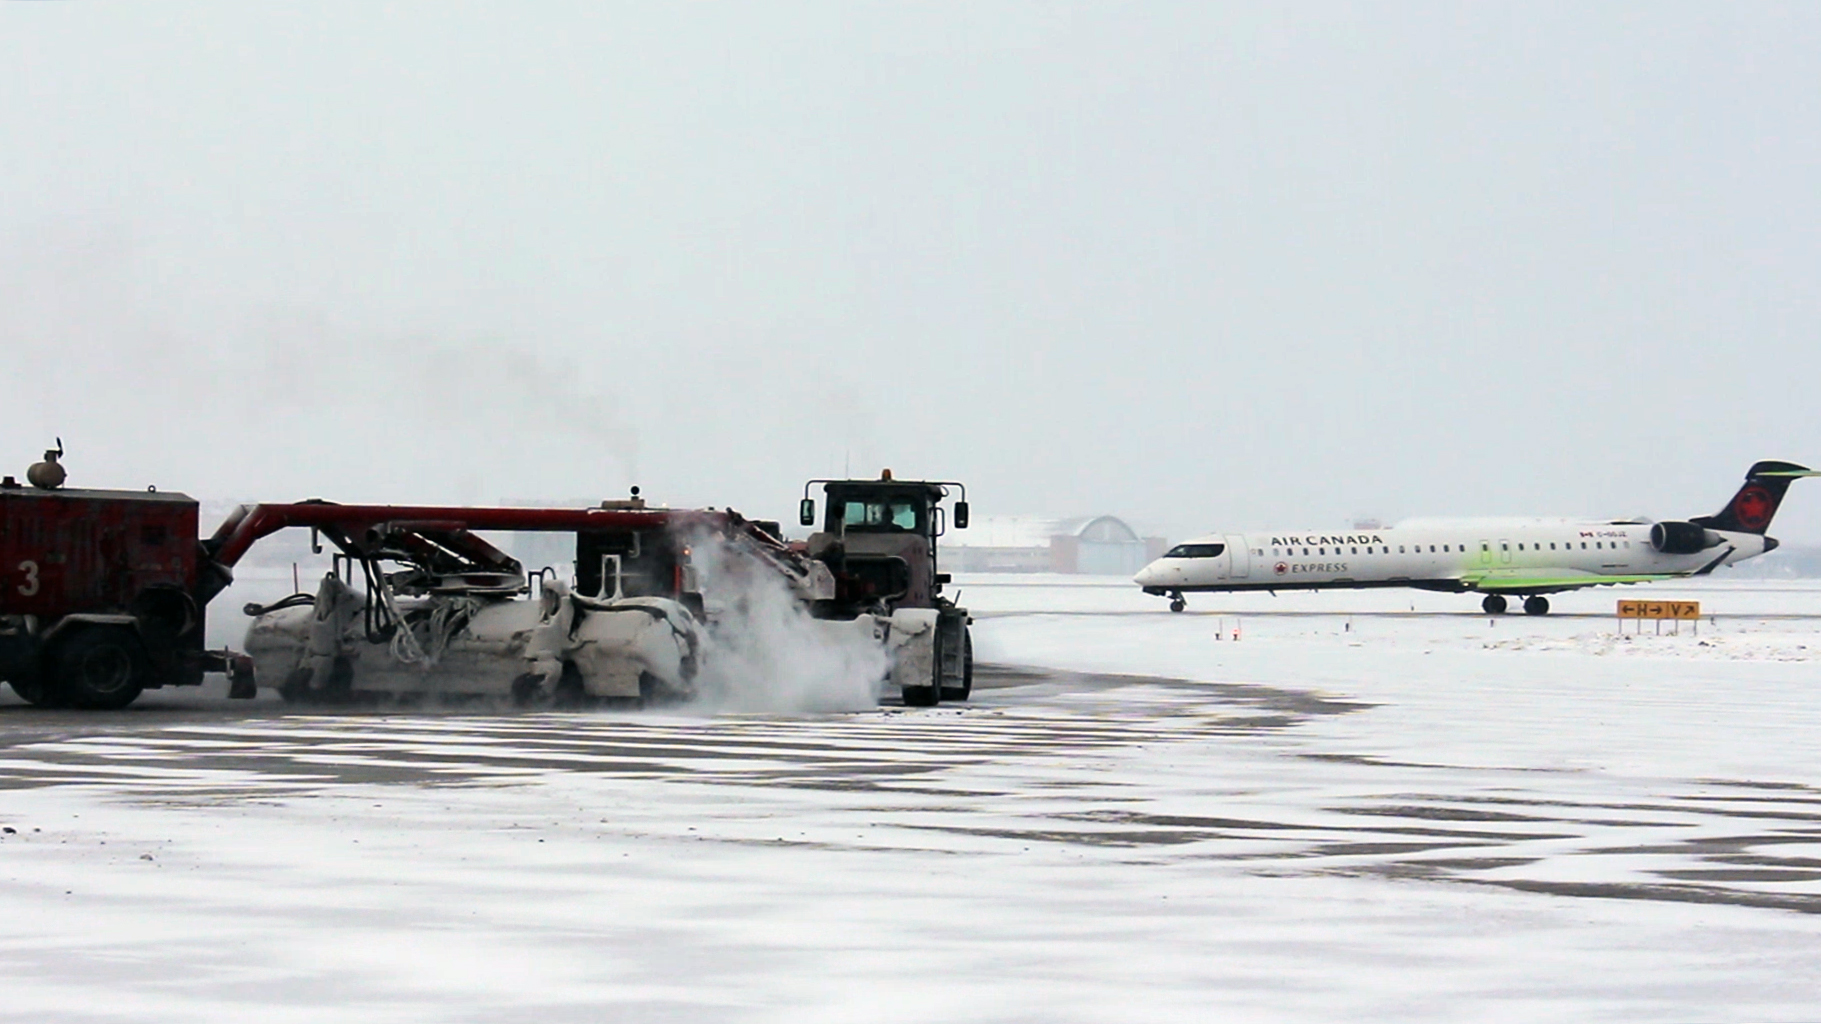 A plow clears snow on the airfield as an Air Canada plane taxis in the background.